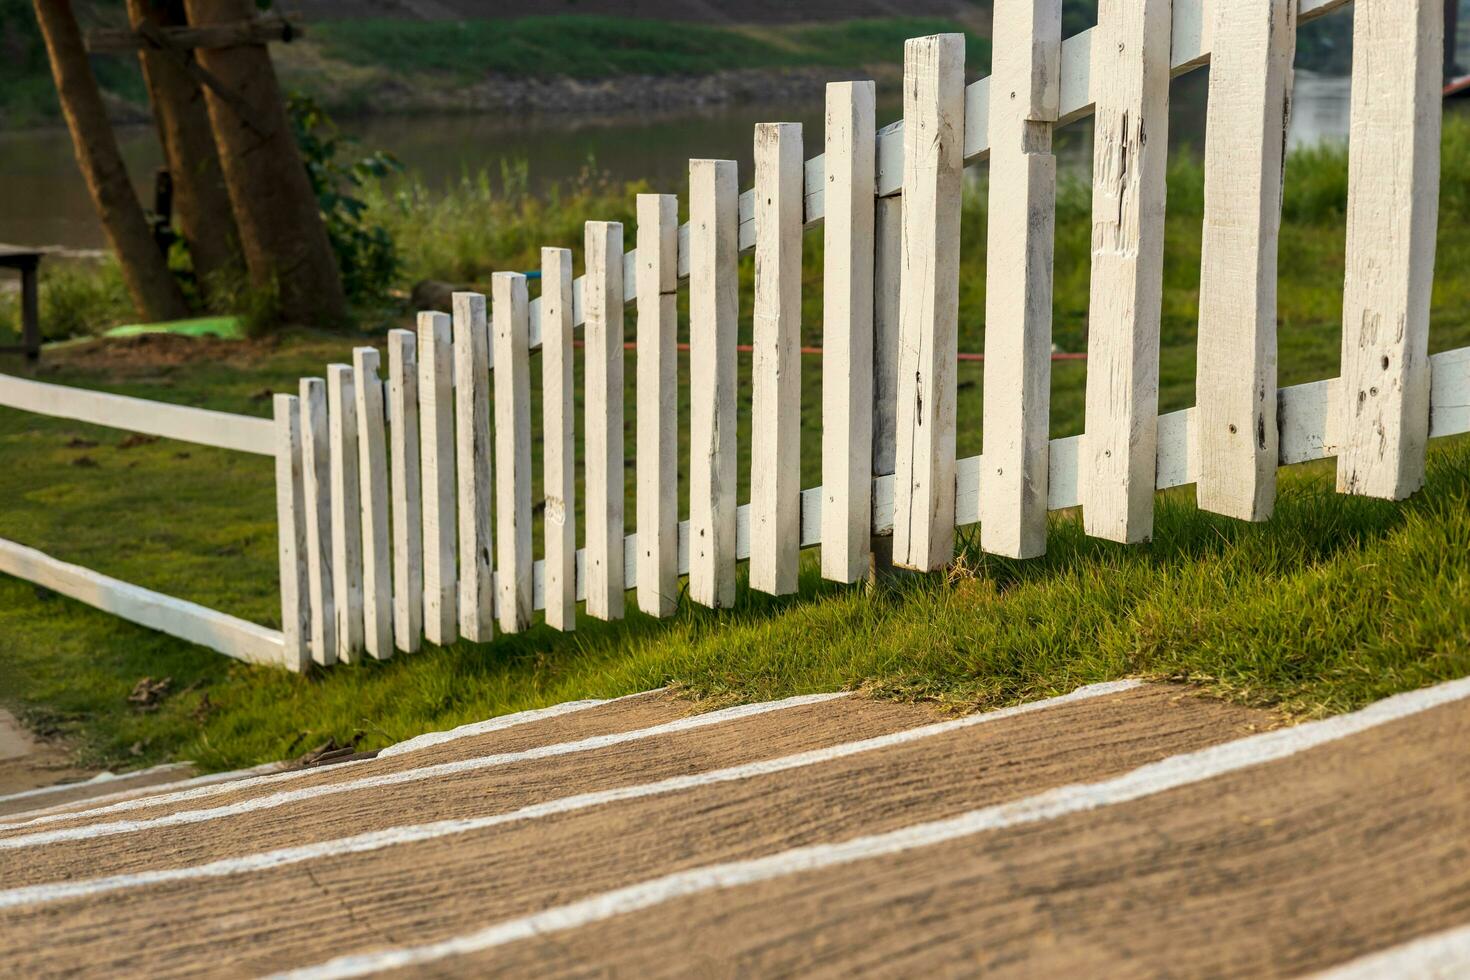 A close-up view of a white wooden fence stretching across the lawn near a concrete staircase. photo